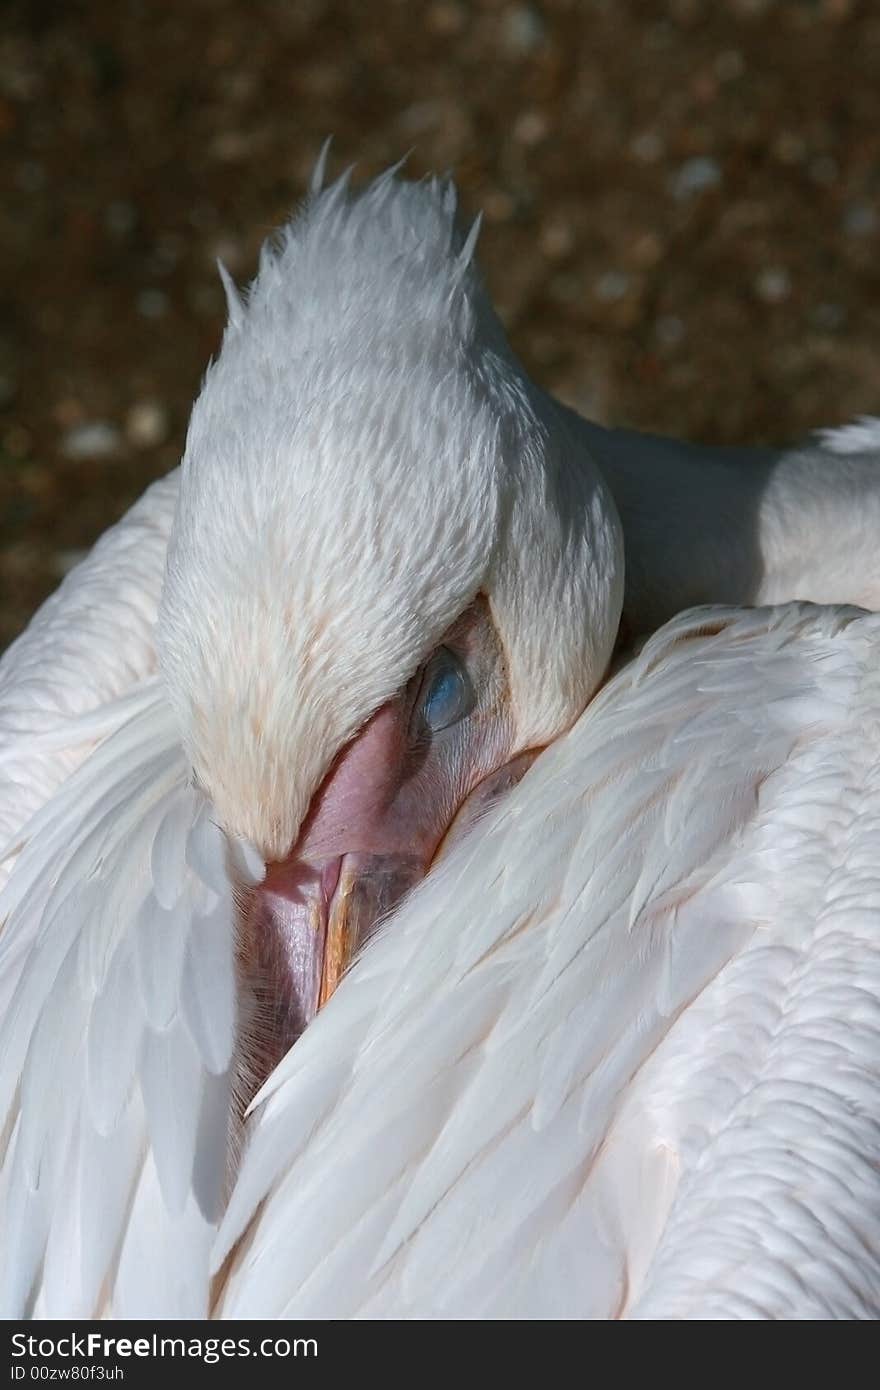 Sleeping pelican, closing one's eye and stuffing its nub into feathers